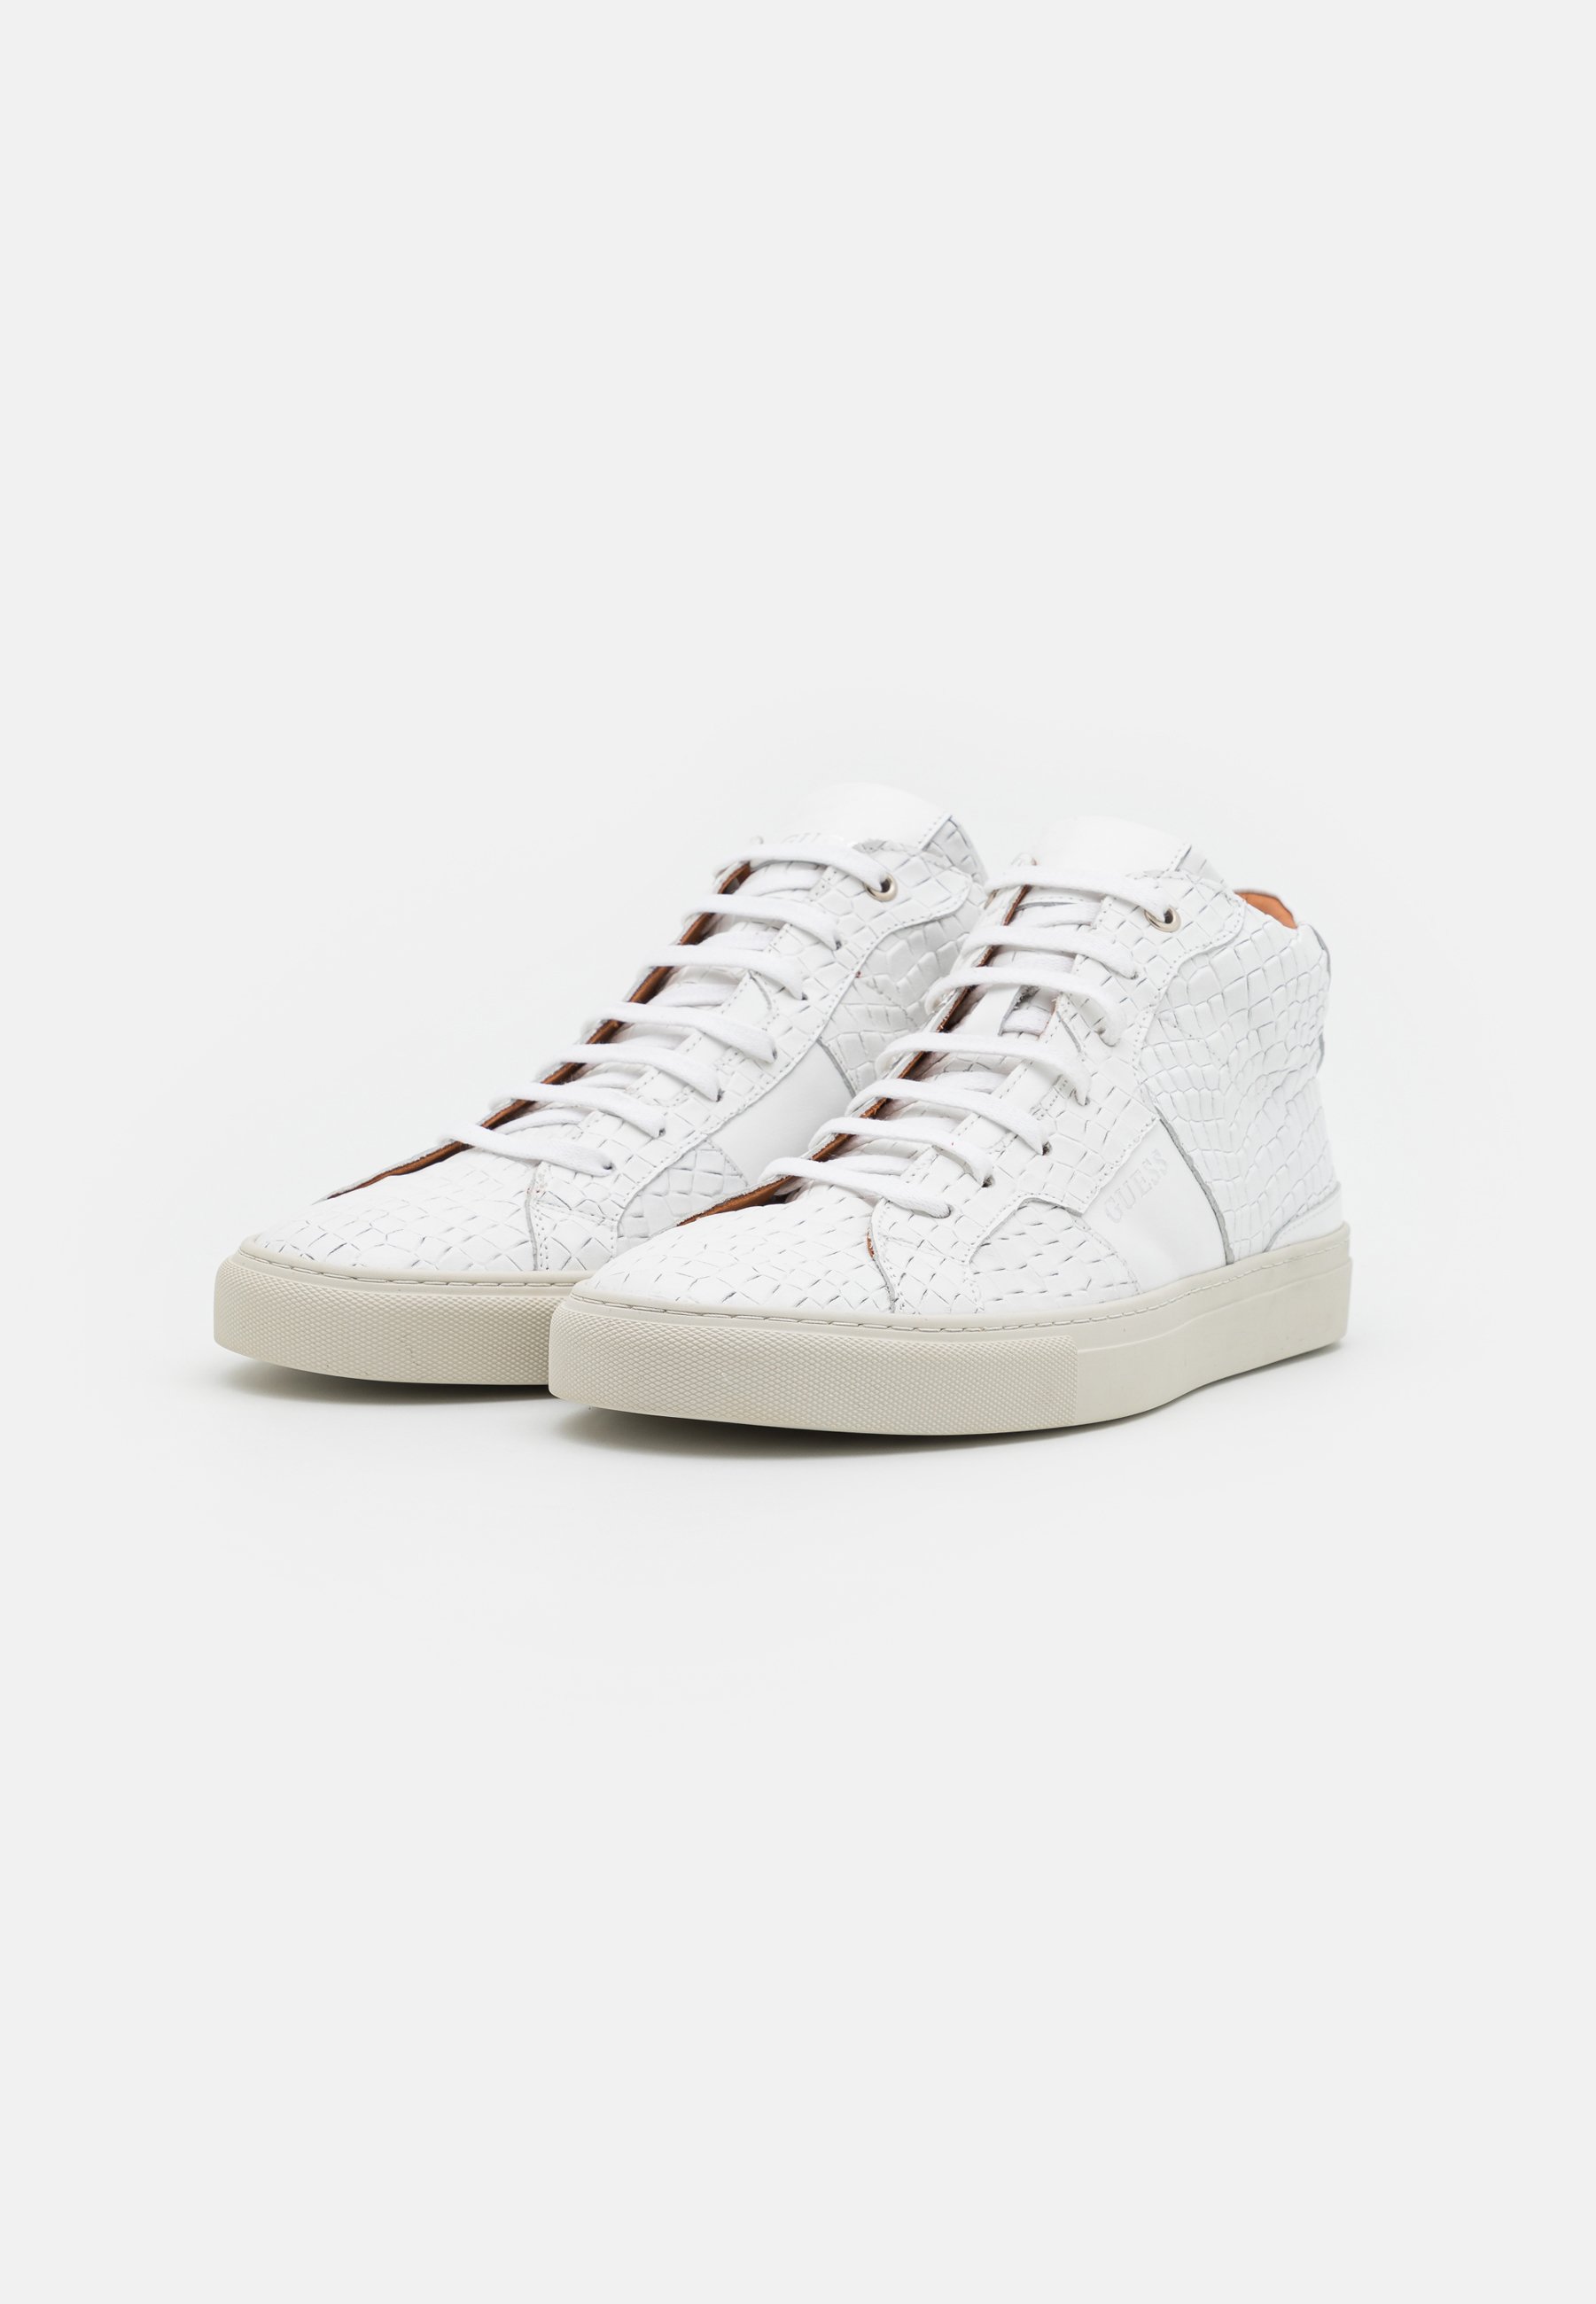 Guess Ravenna Mid White Leather Trainers